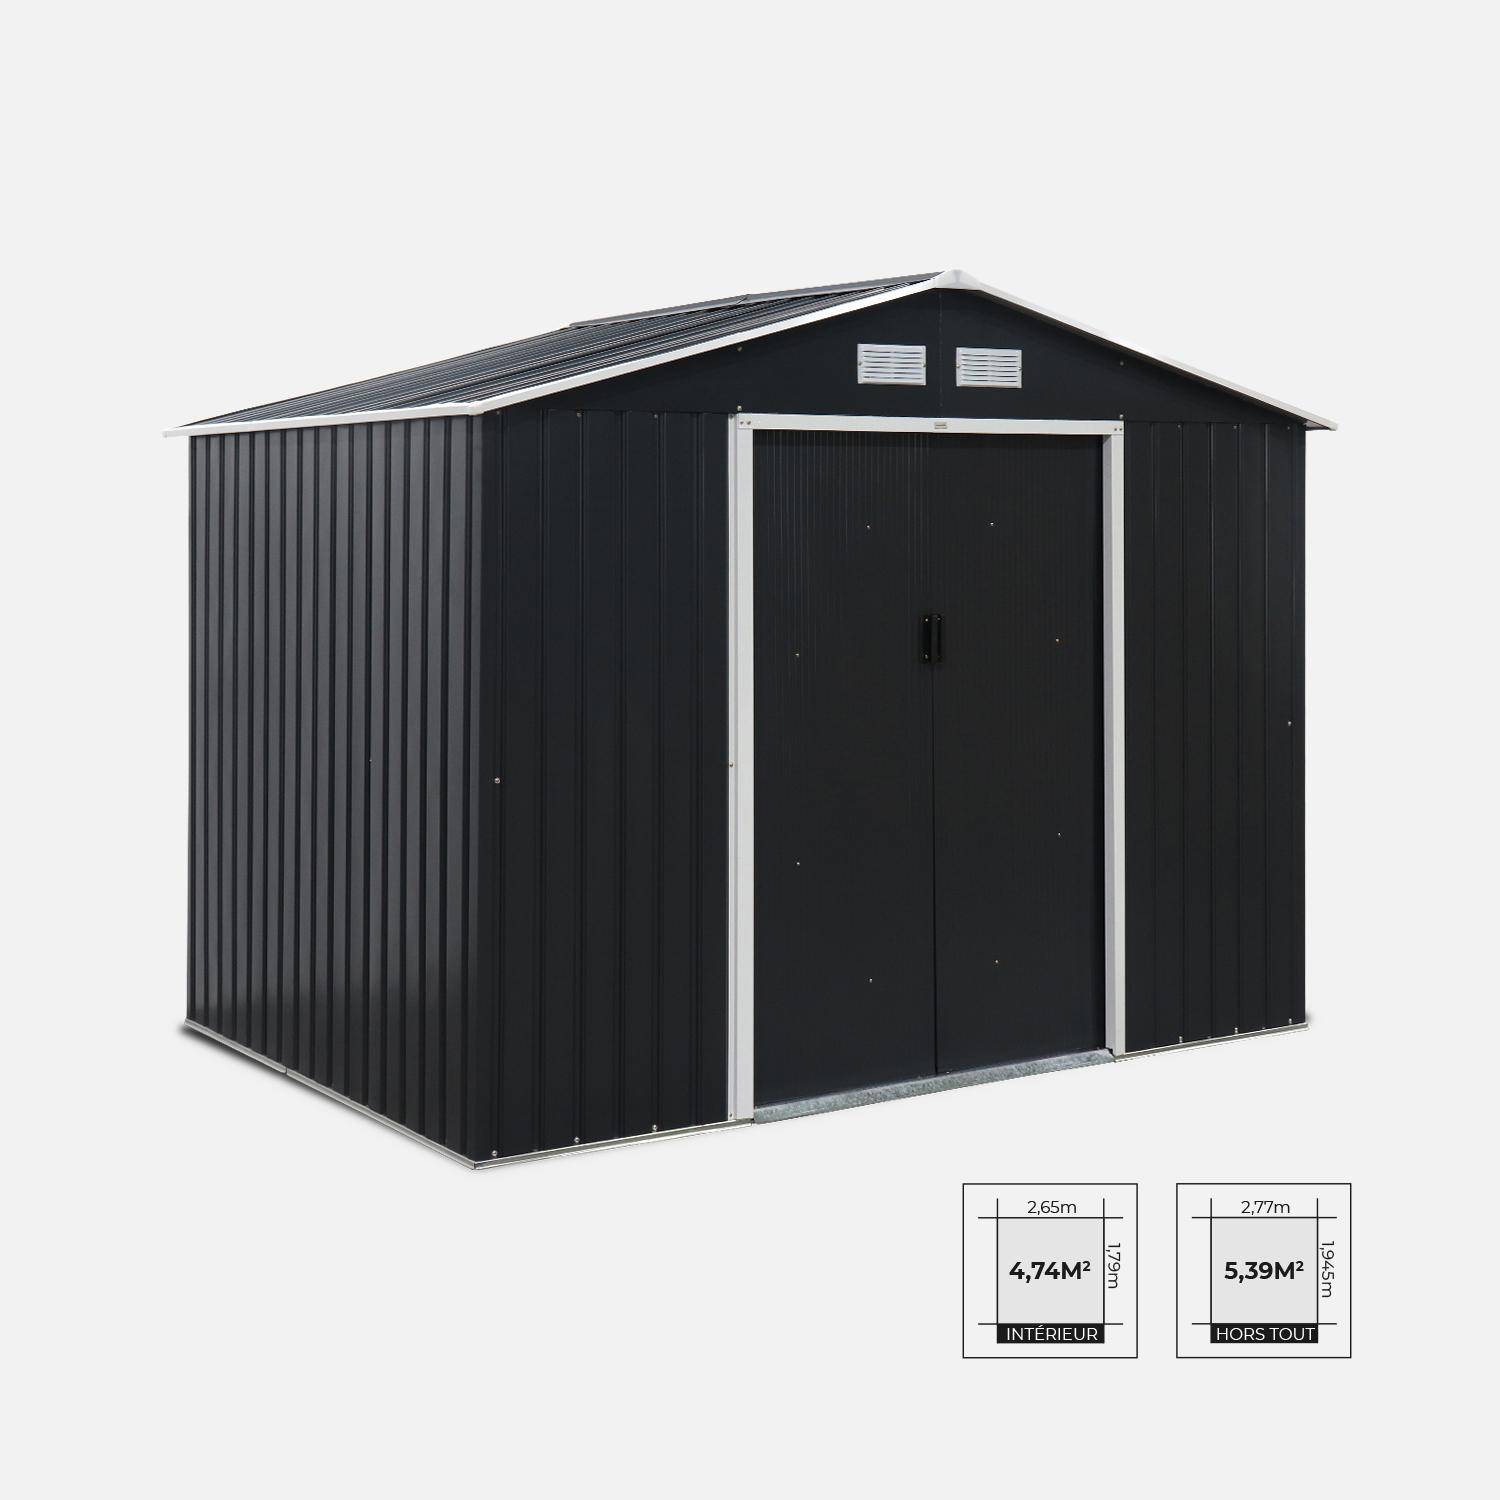 (9 X 6FT) 5.39m² Metal garden shed - Tool shed with single latch door, ground fixing kit supplied - Ferrain - Grey and White,sweeek,Photo3